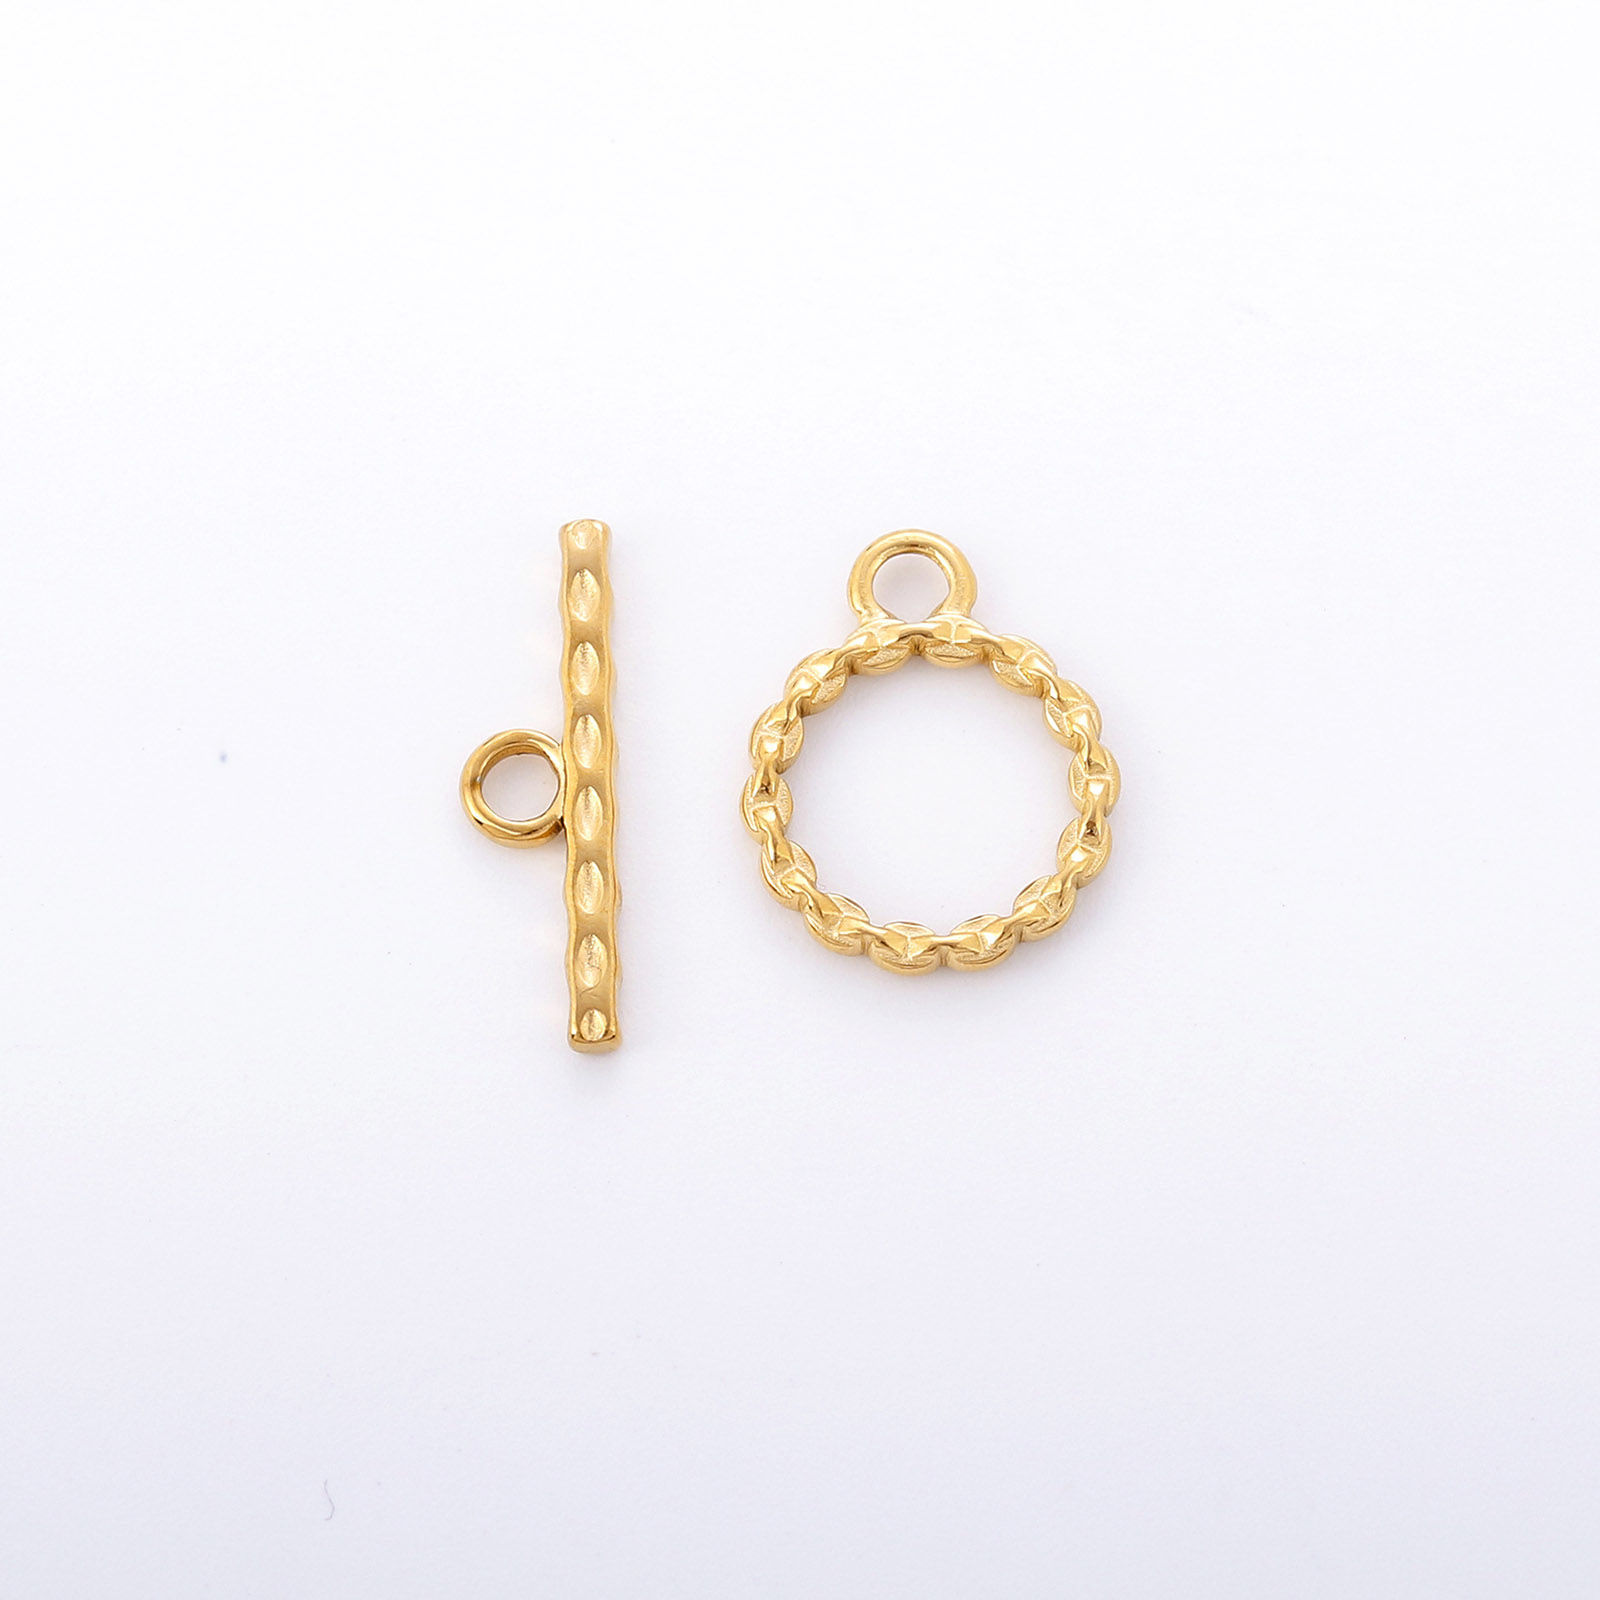 Picture of Eco-friendly Vacuum Plating 304 Stainless Steel Toggle Clasps Round 18K Gold Plated 1 Set